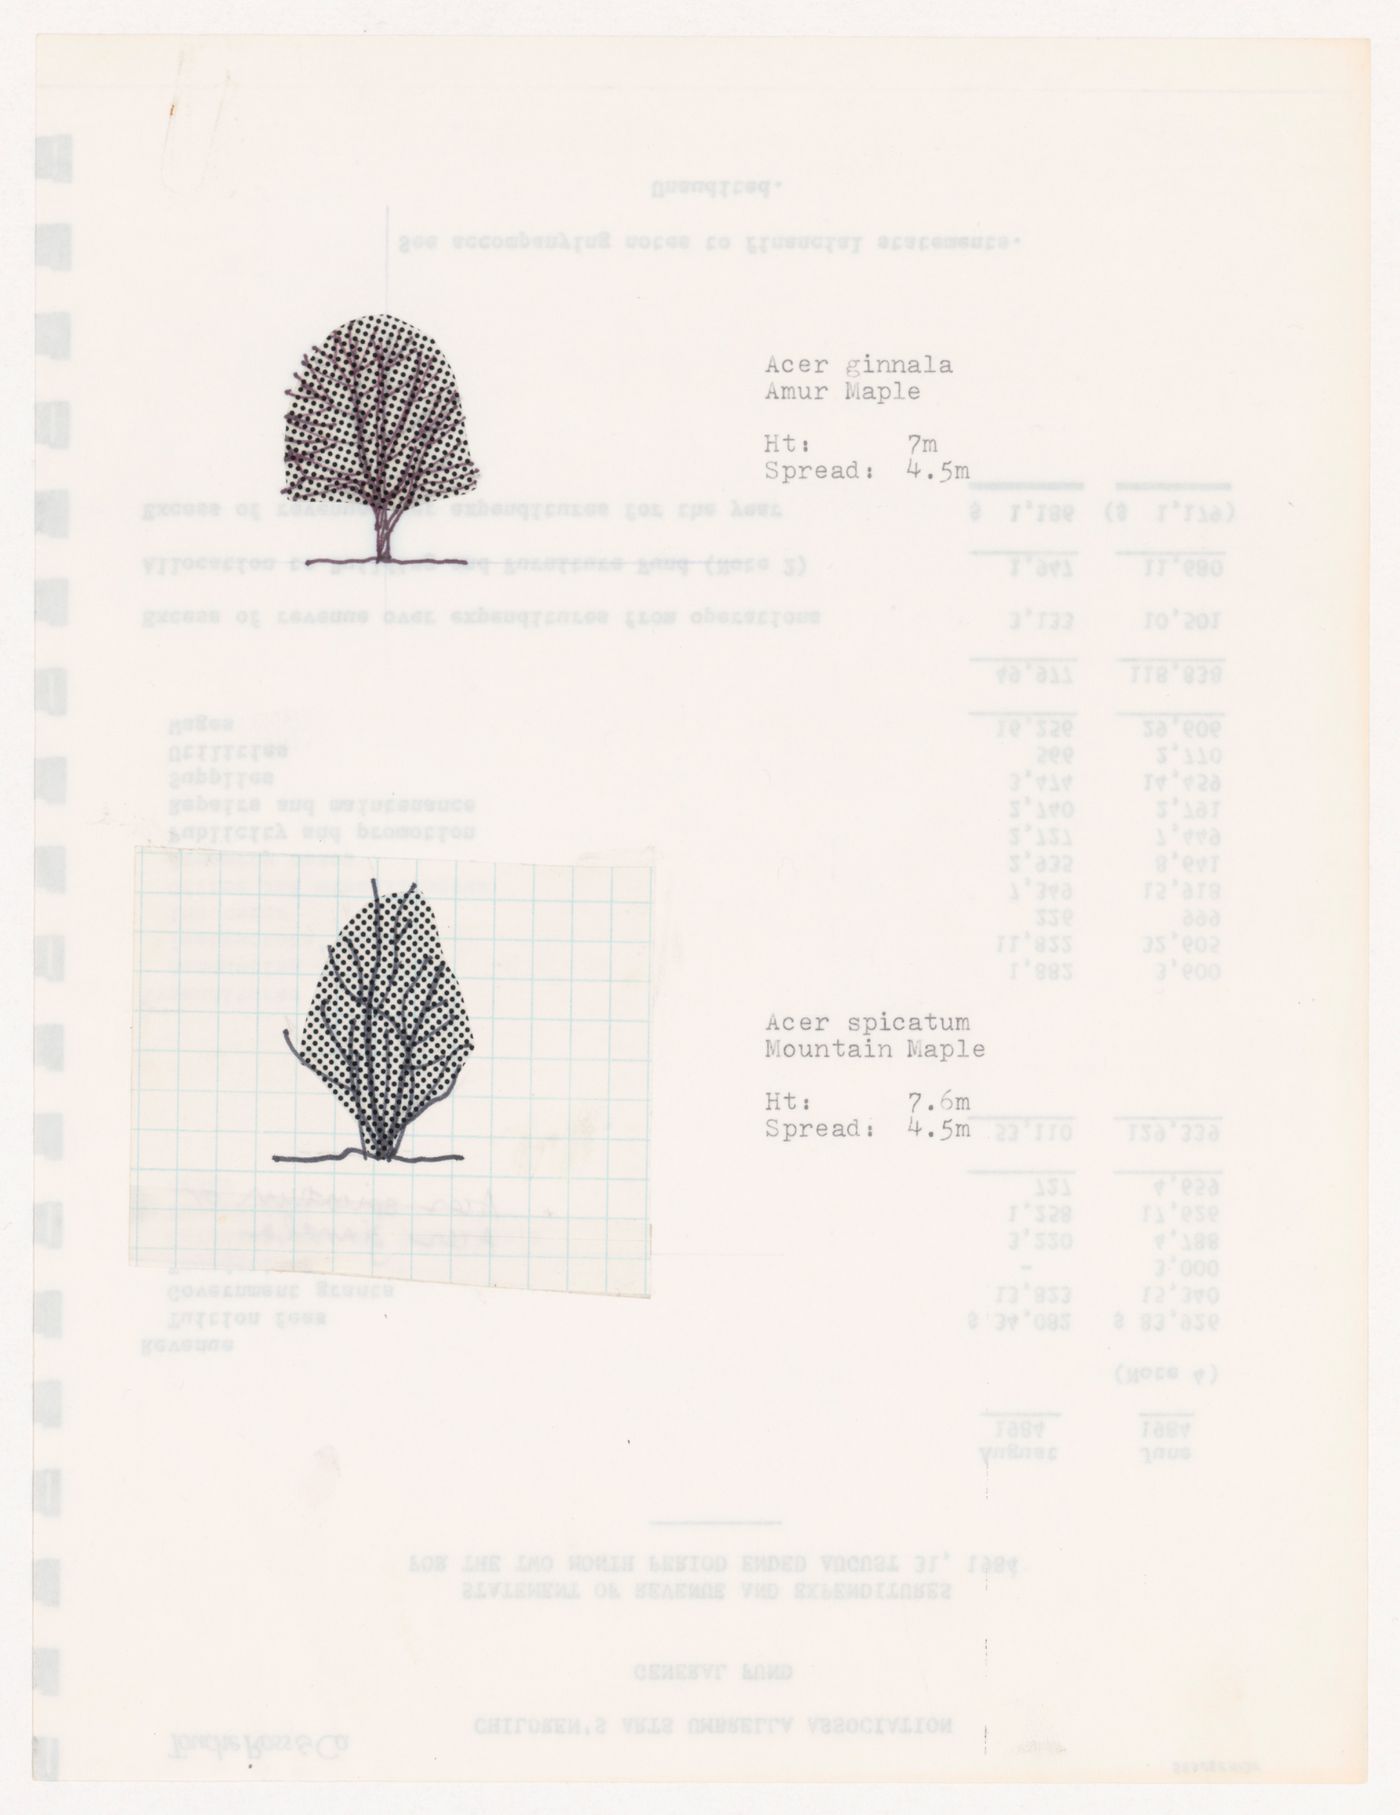 Plant specifications with illustration of specimens for National Gallery of Canada, Ottawa, Ontario